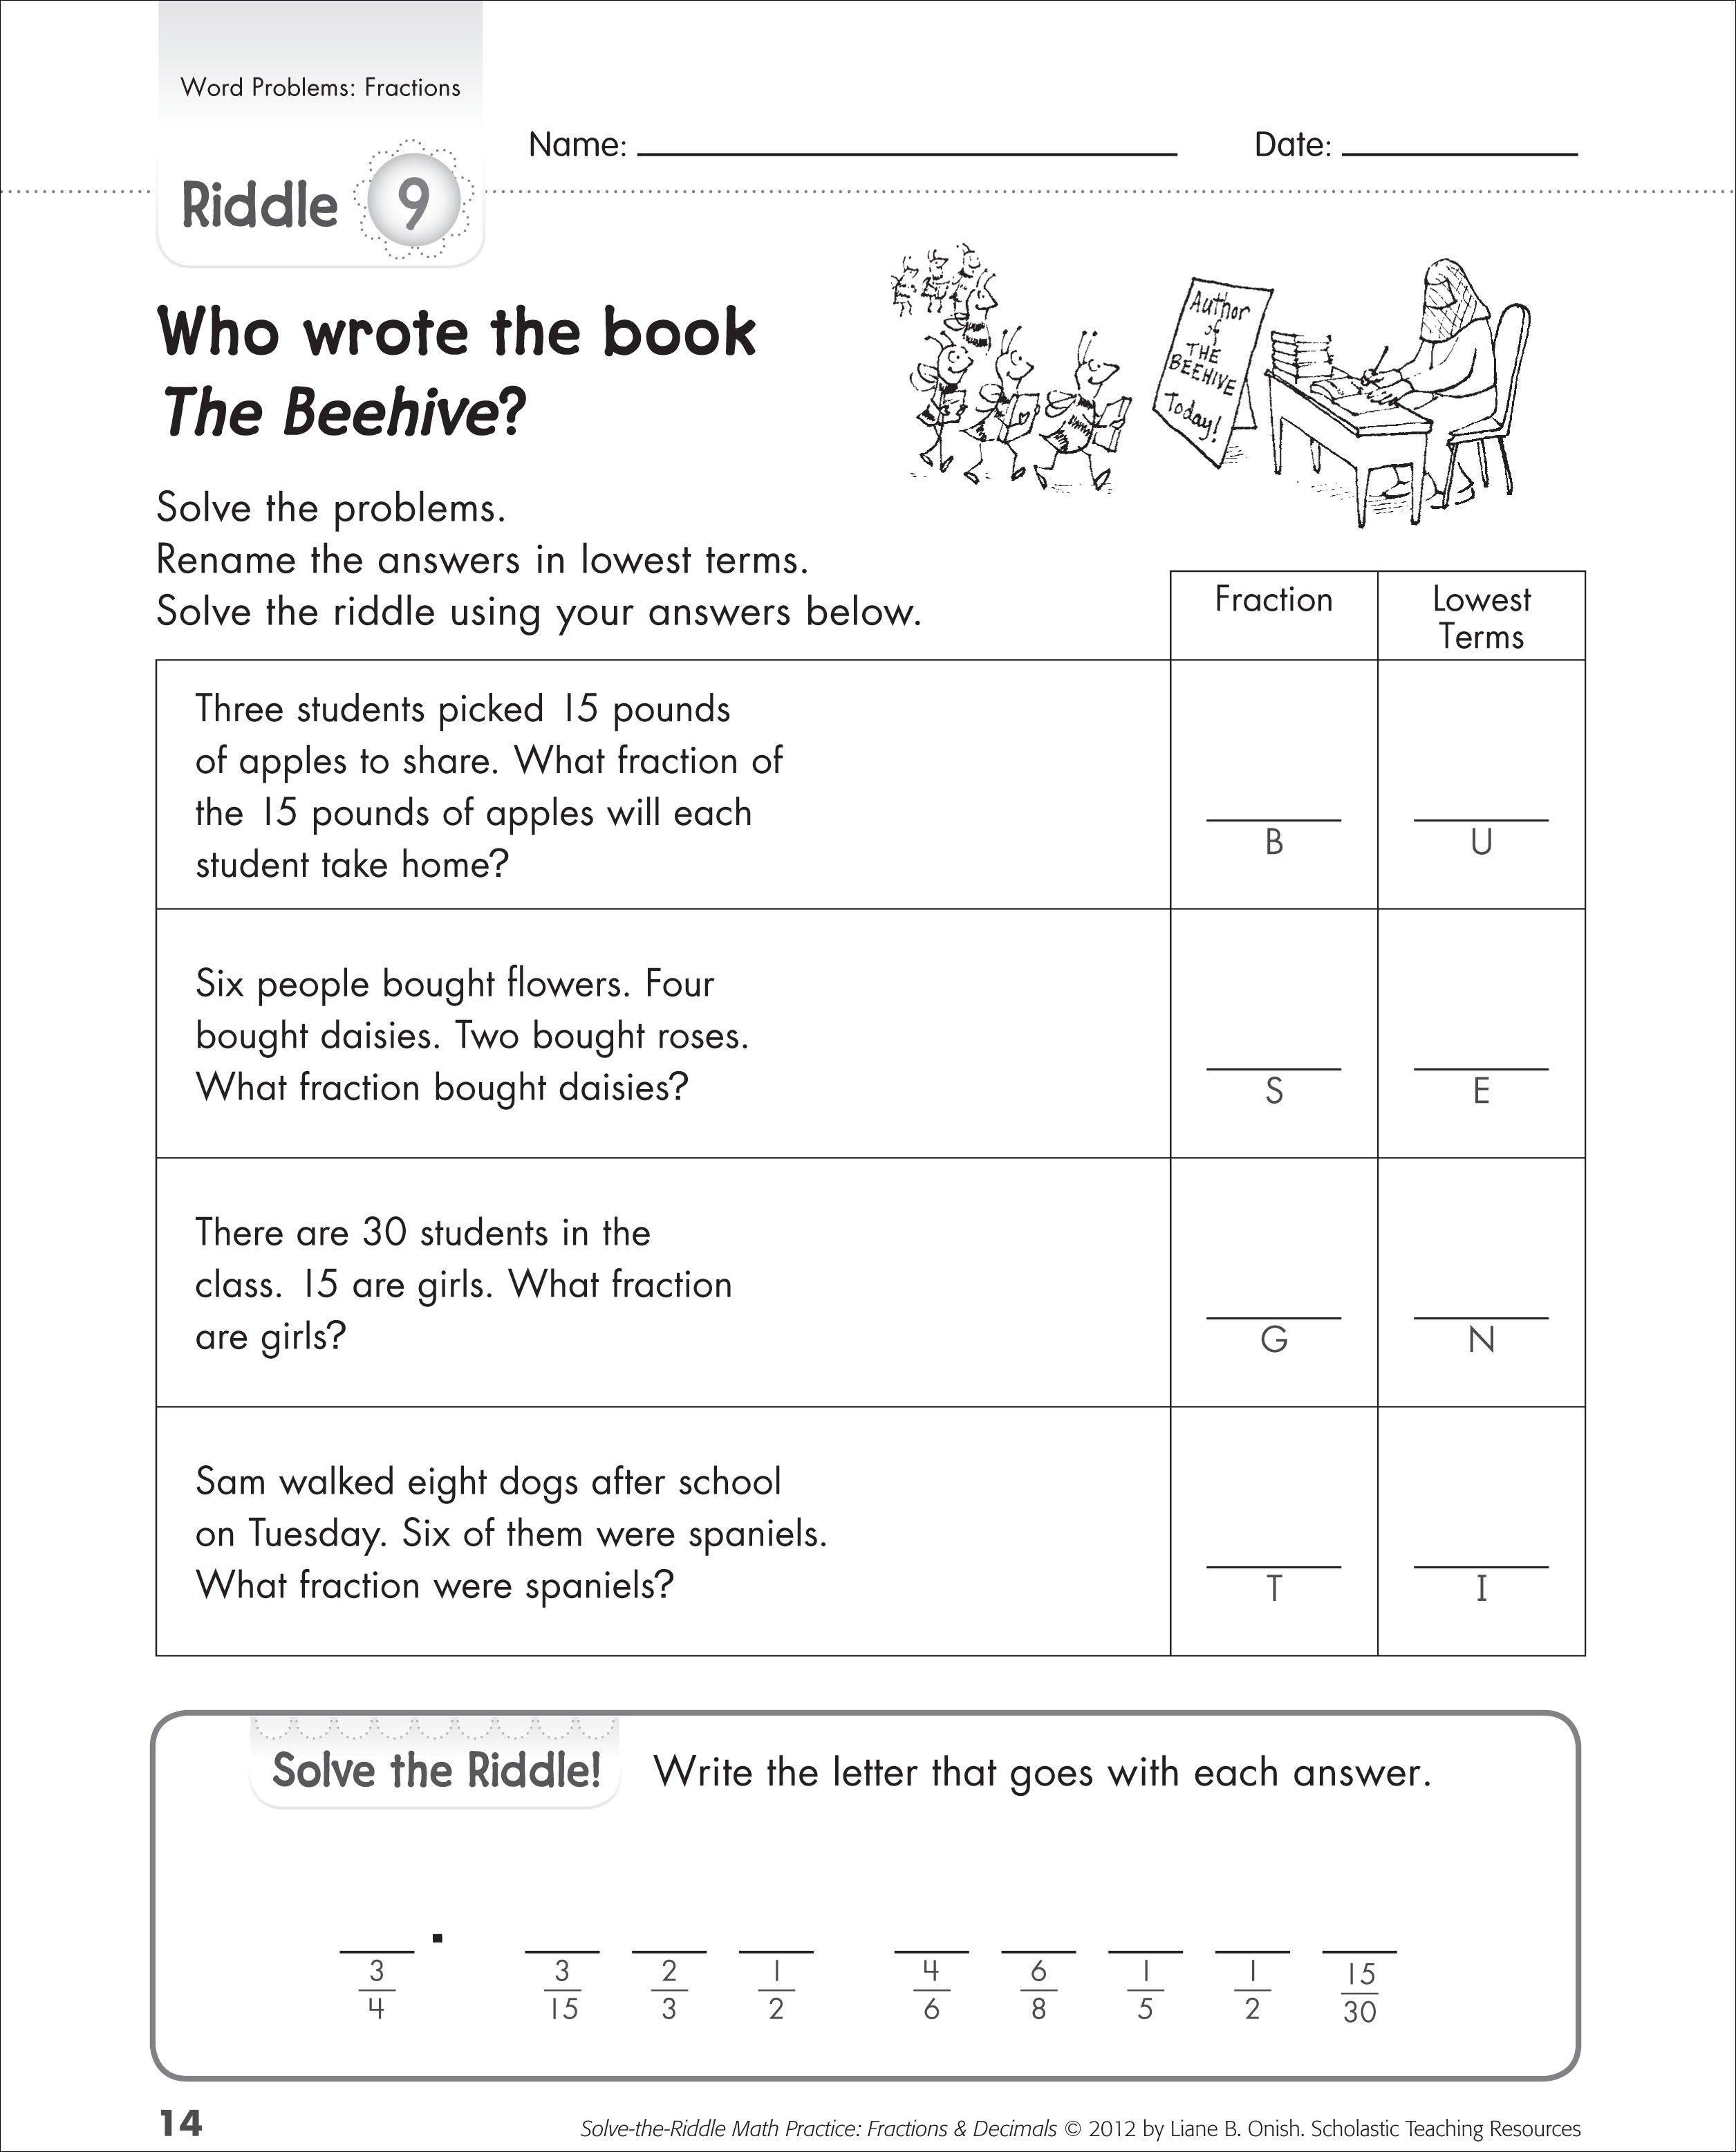  Word Problems Free Printable Fraction Word Problem Worksheets Lexia s Blog